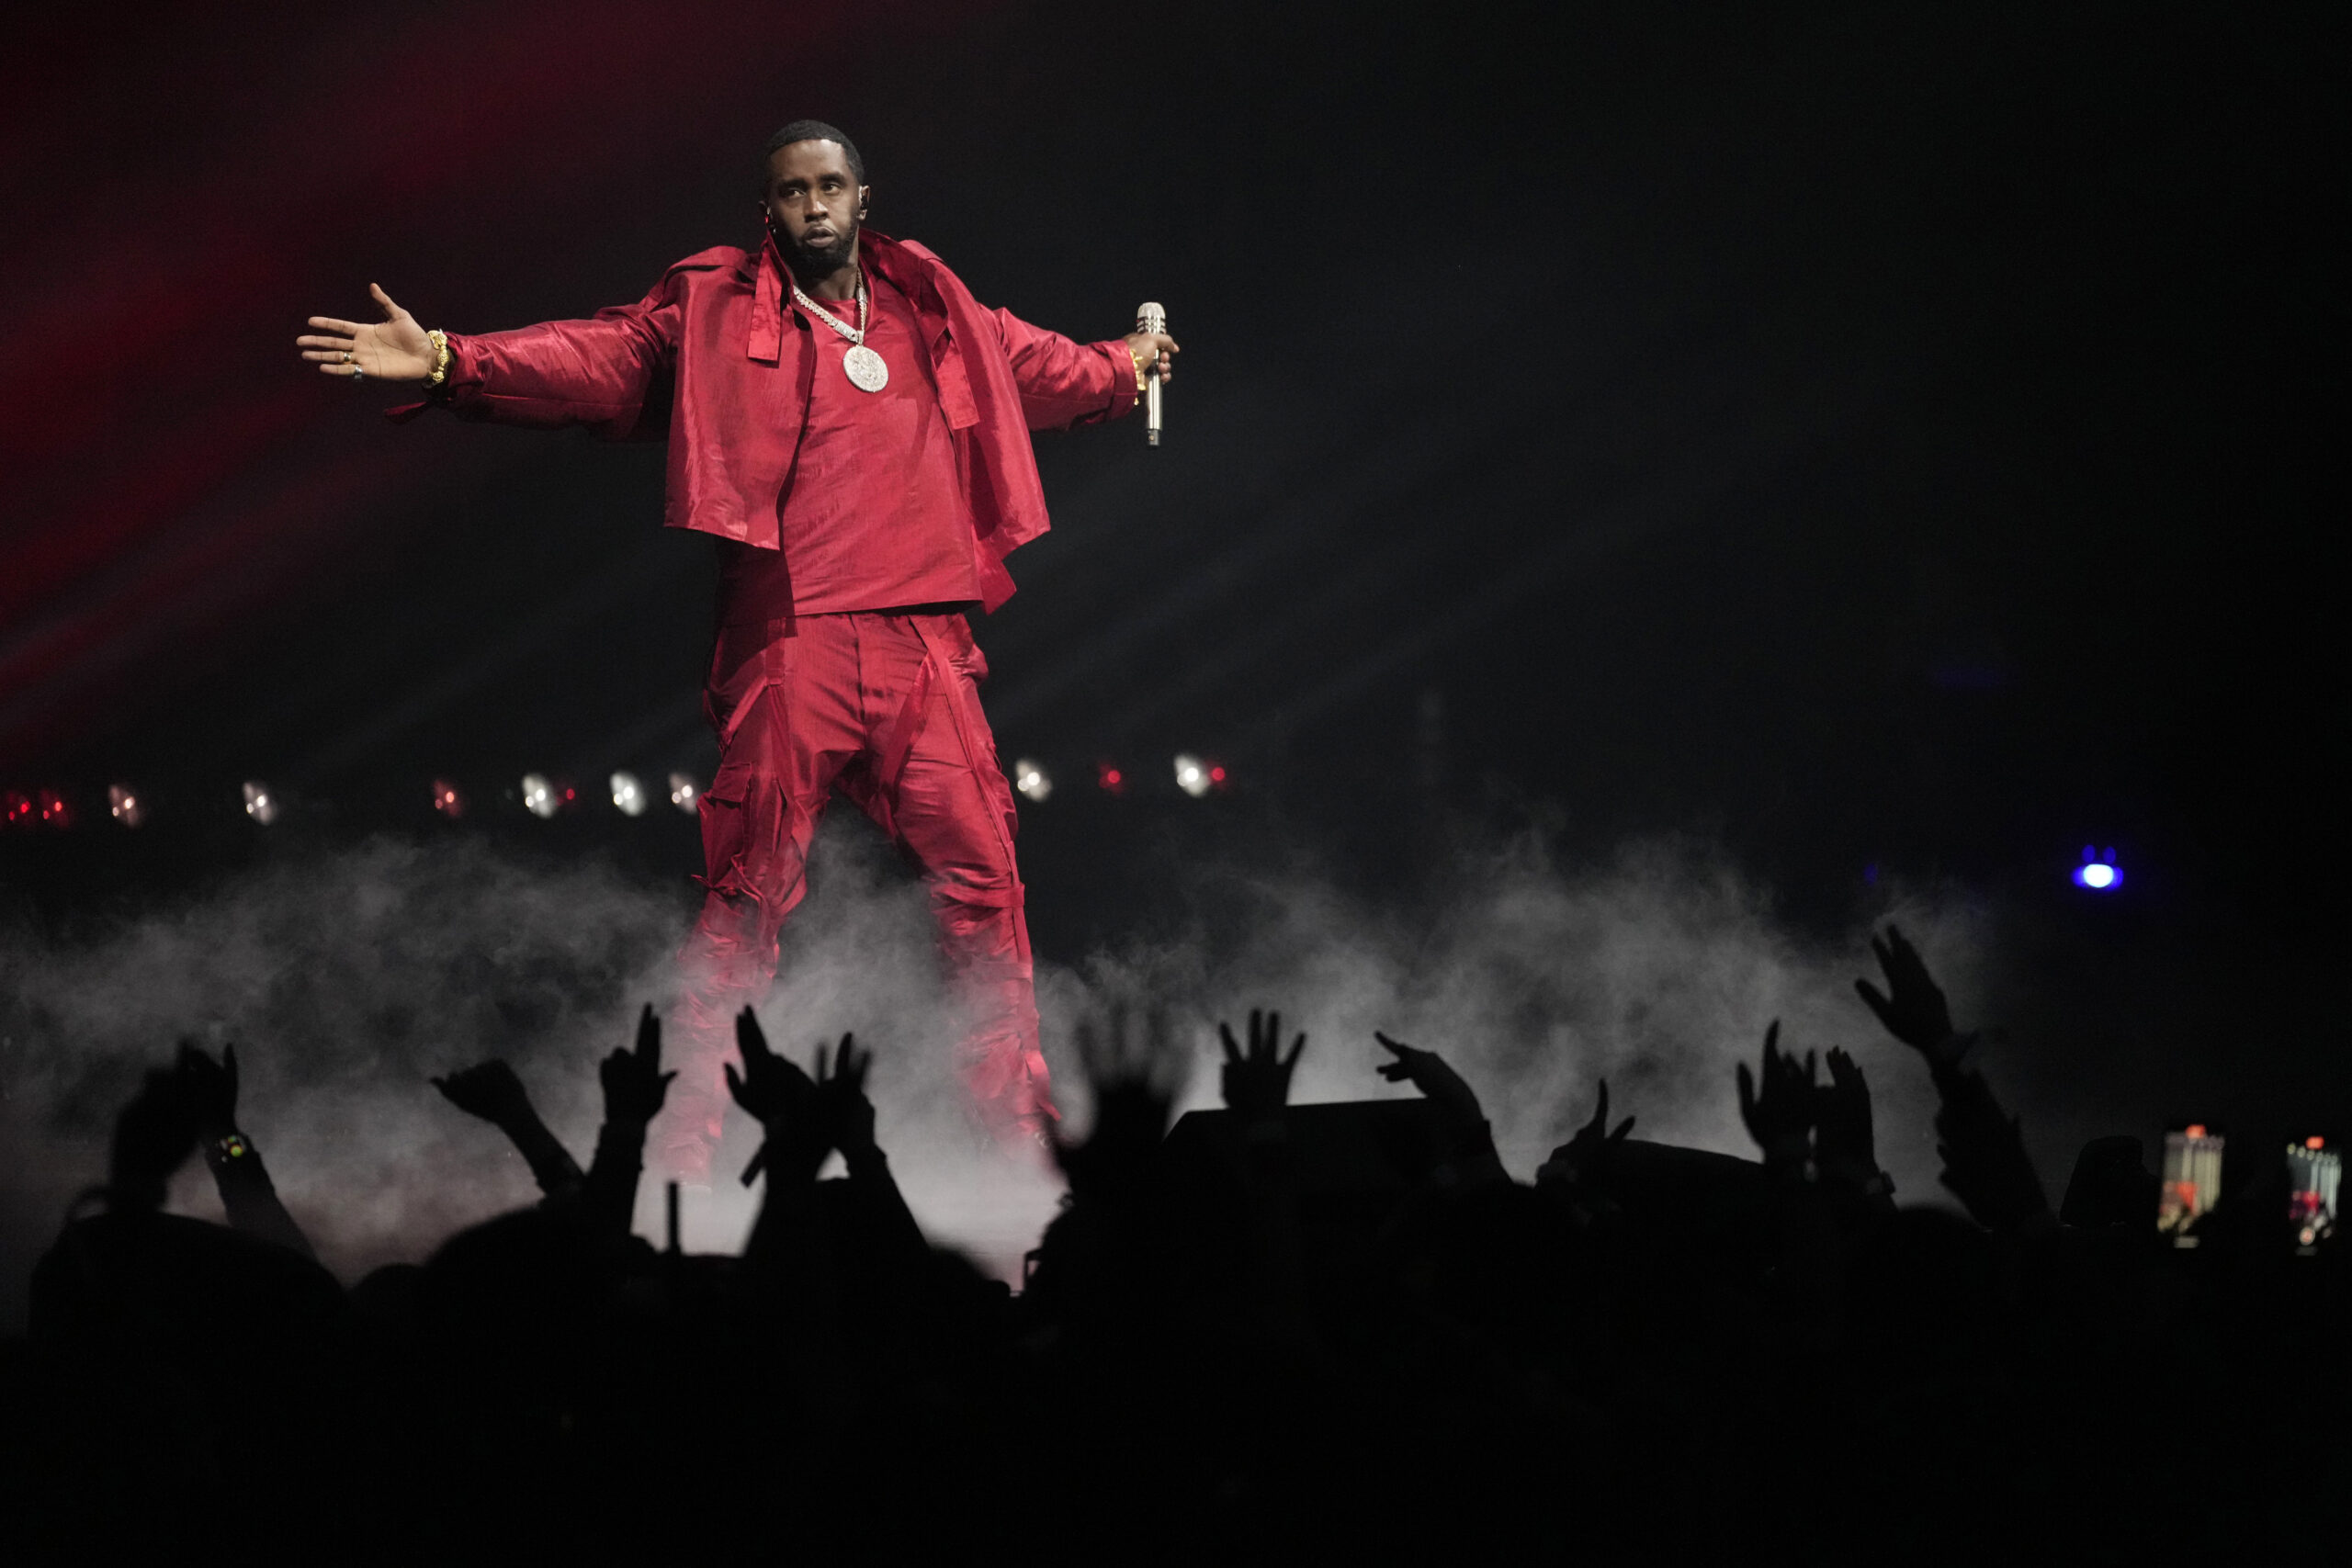 Sean "Diddy" Combs performs during the MTV Video Music Awards on Tuesday, Sept. 12, 2023, at the Prudential Center in Newark, New Jersey. Photo credit: Charles Sykes, Invision/The Associated Press